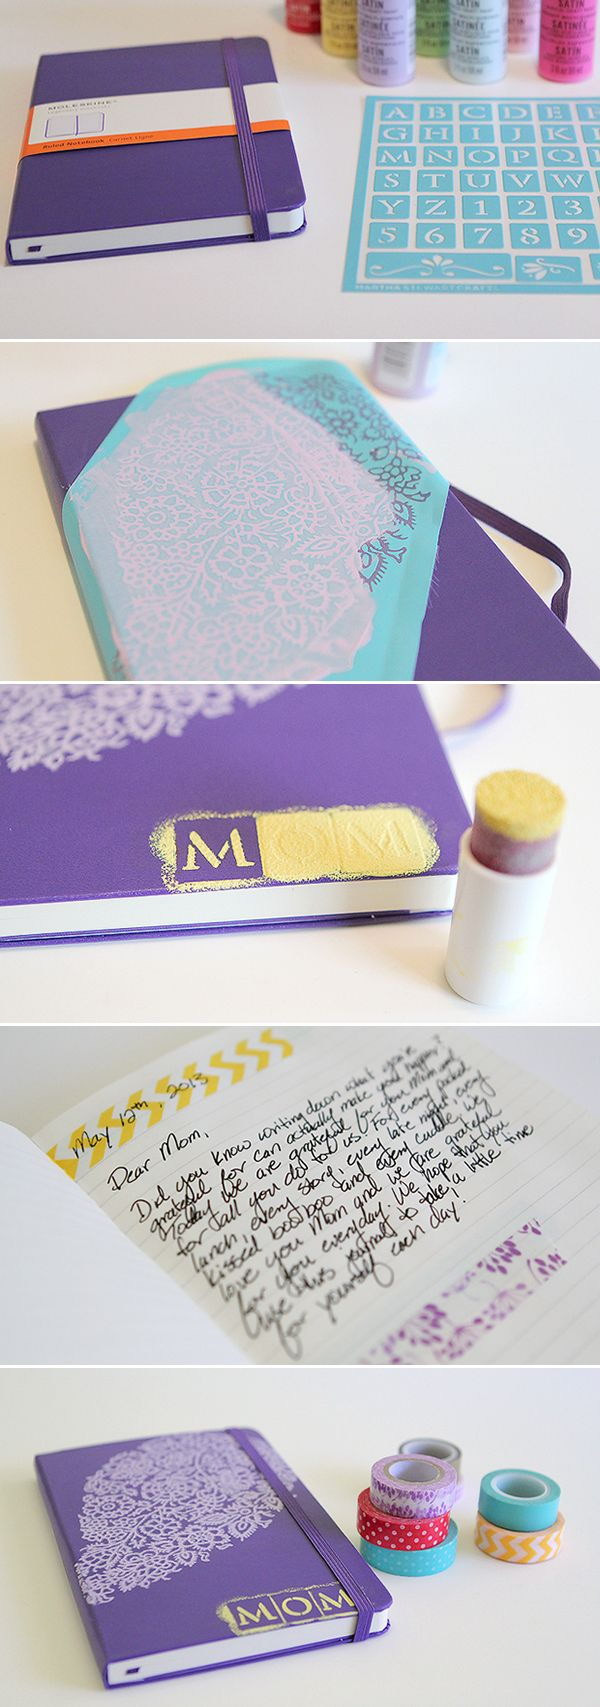 DIY Gift For Your Mom
 20 Heartfelt DIY Gifts for Mom Noted List